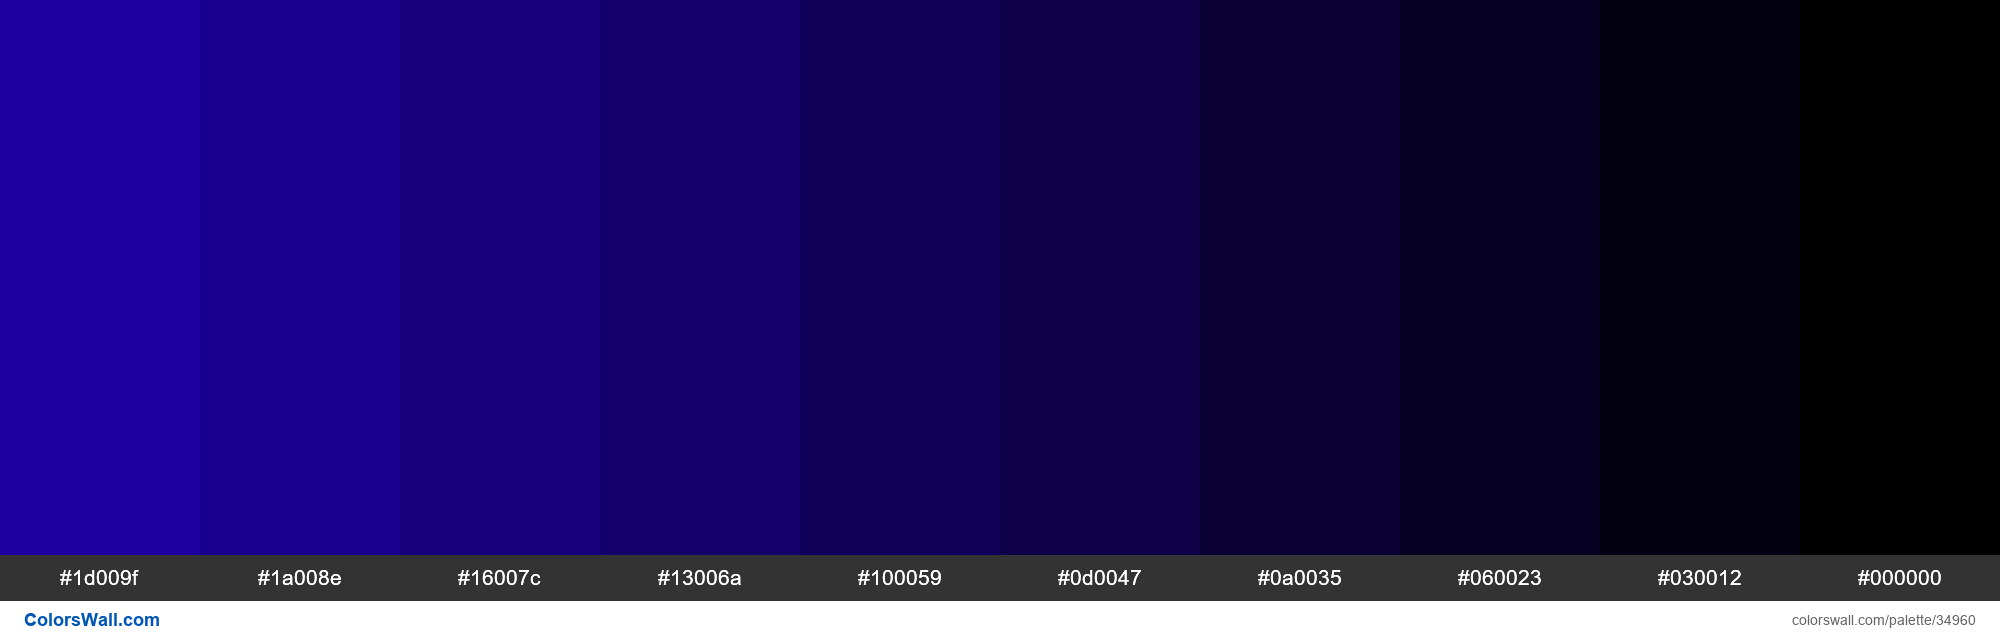 Shades XKCD Color ultramarine #2000b1 hex colors palette - ColorsWall